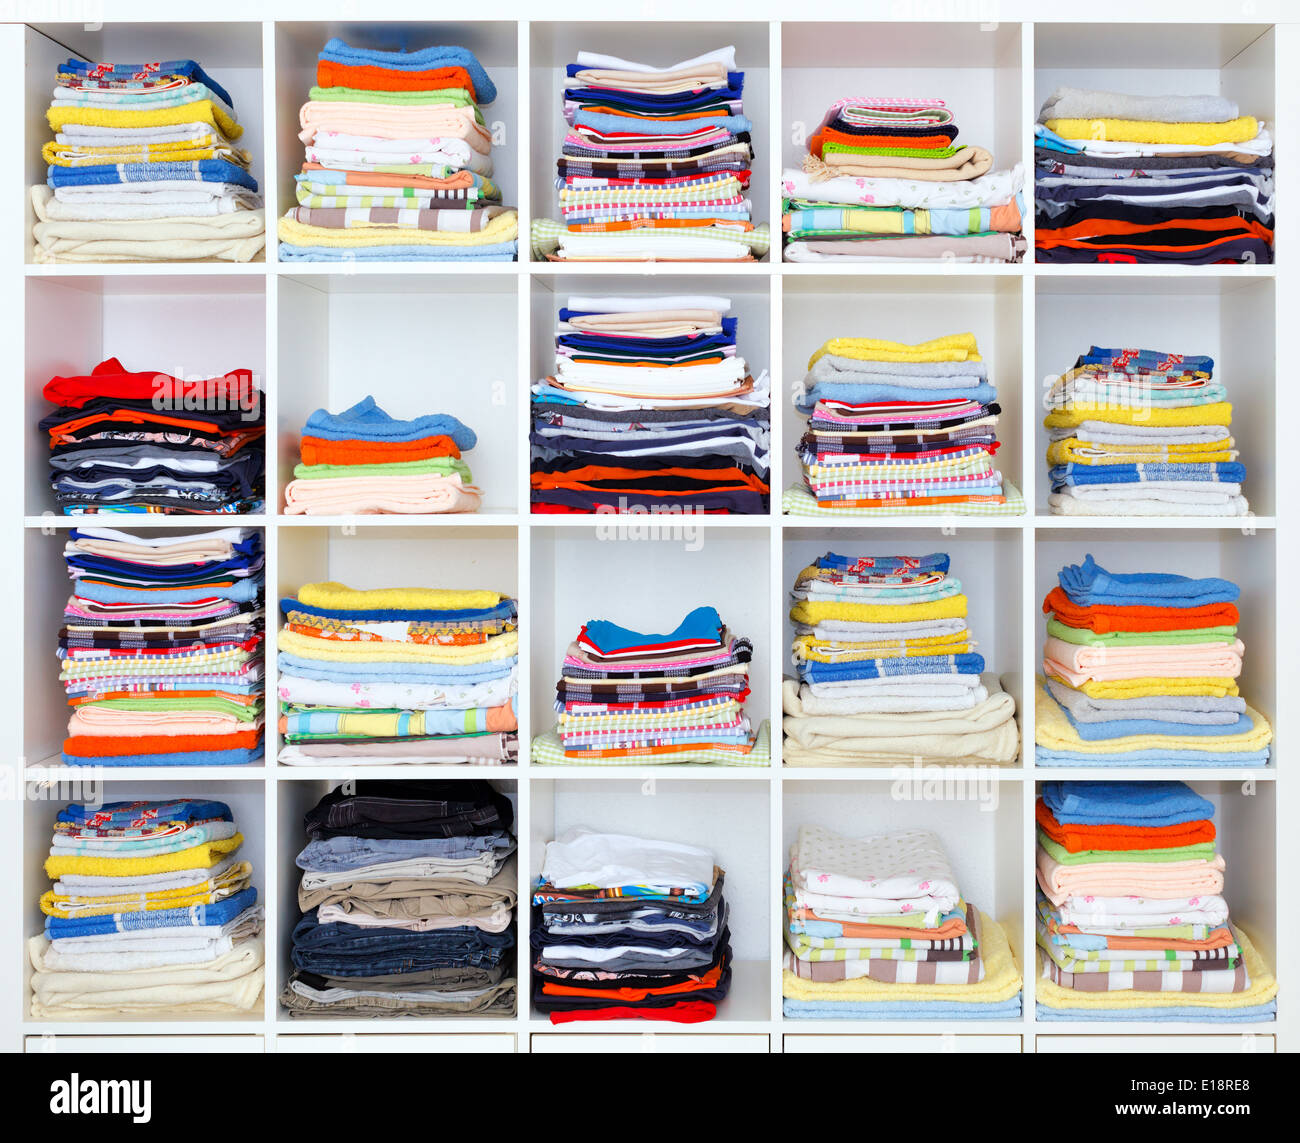 towels, bed sheets and clothes on the shelf Stock Photo